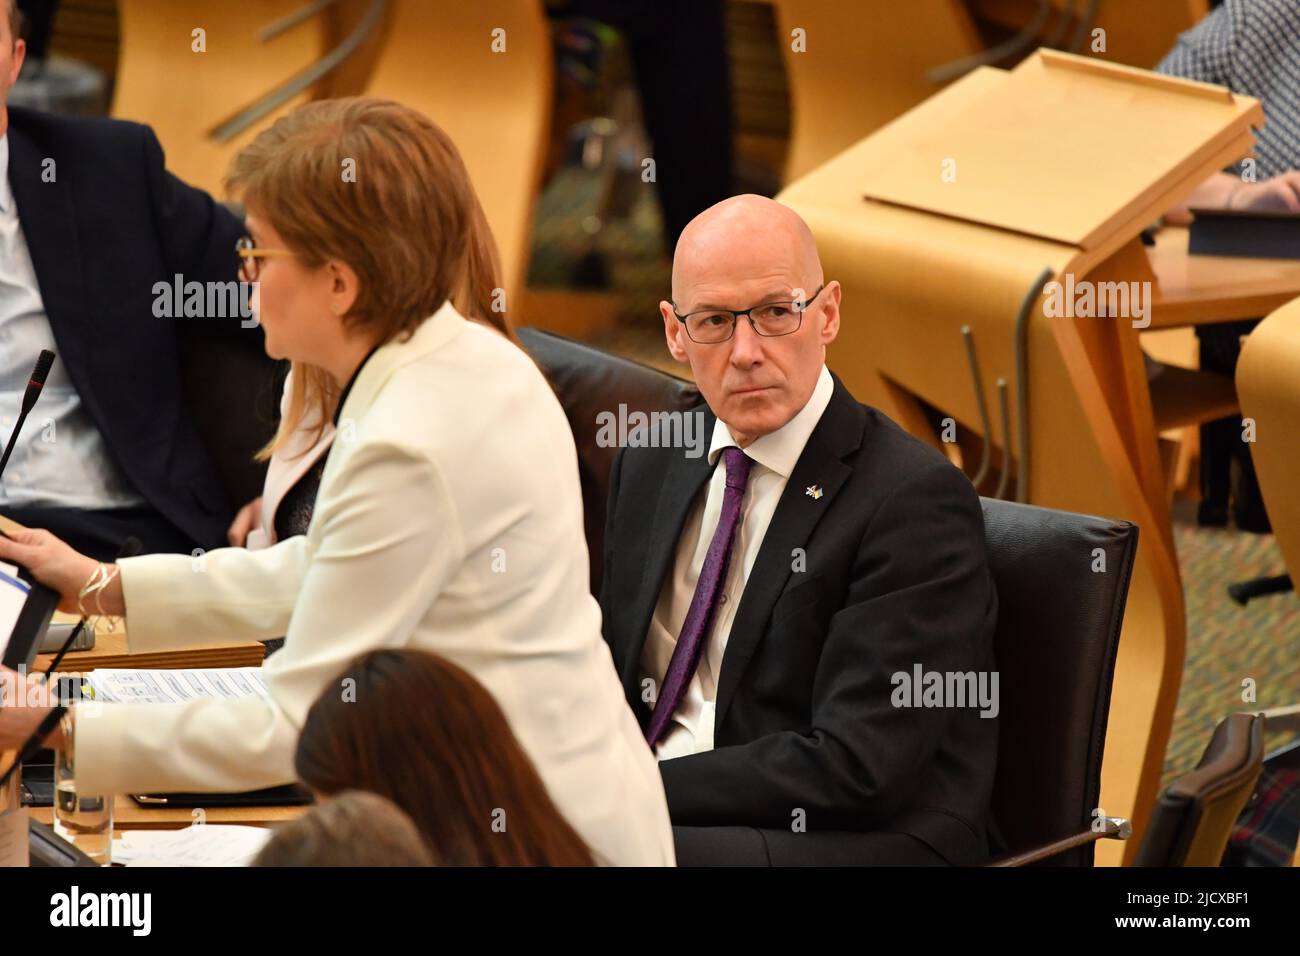 Edinburgh, Scotland, UK. 16th June, 2022. PICTURED: Inside the Scottish Parliament at Holyrood at the weekly session of First Ministers Questions where the First Minister Nicola Sturgeon takes questions in the chamber. Credit: Colin Fisher/Alamy Live News Stock Photo